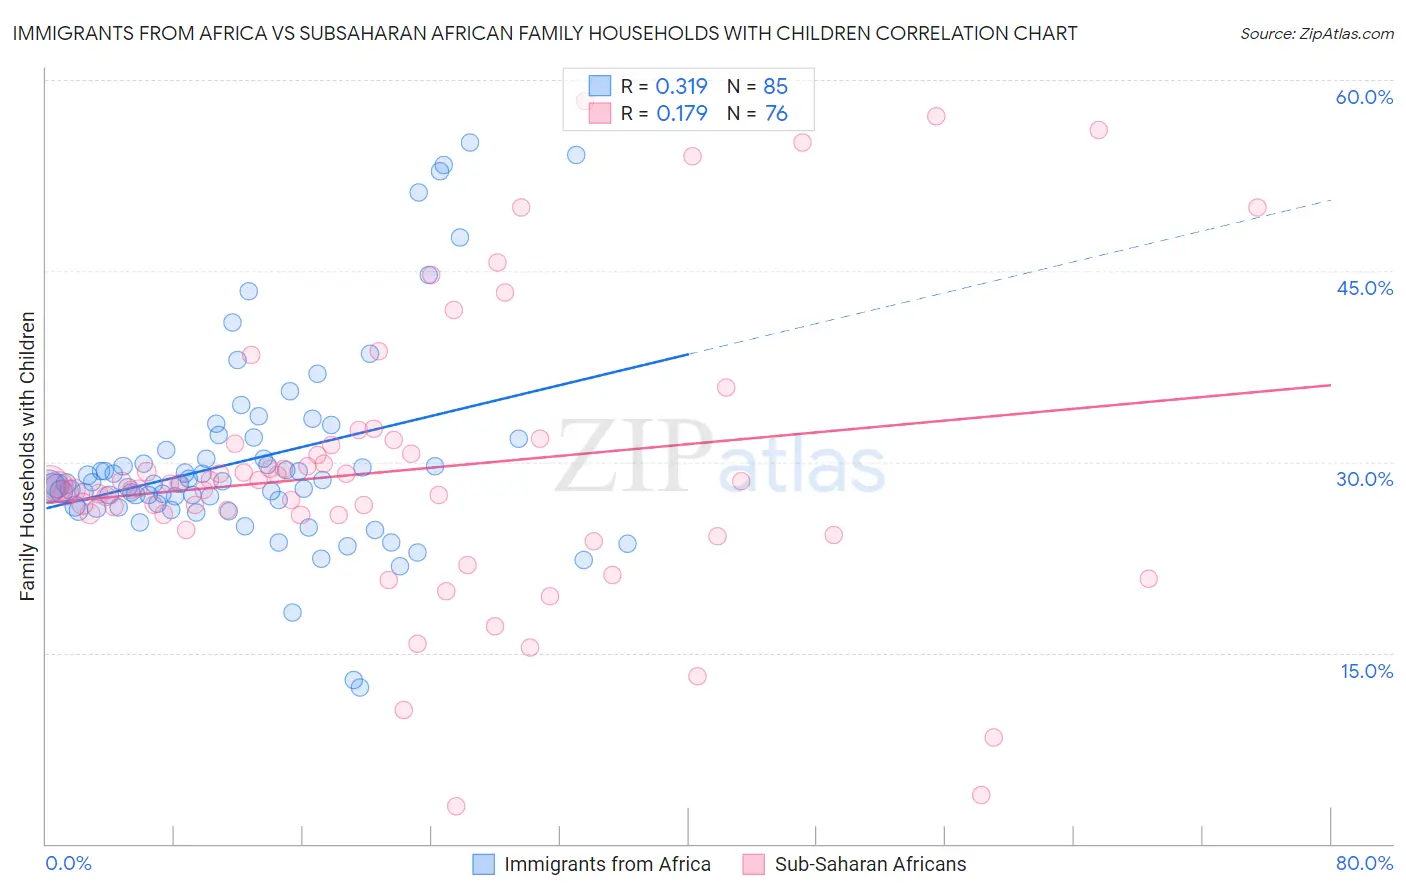 Immigrants from Africa vs Subsaharan African Family Households with Children